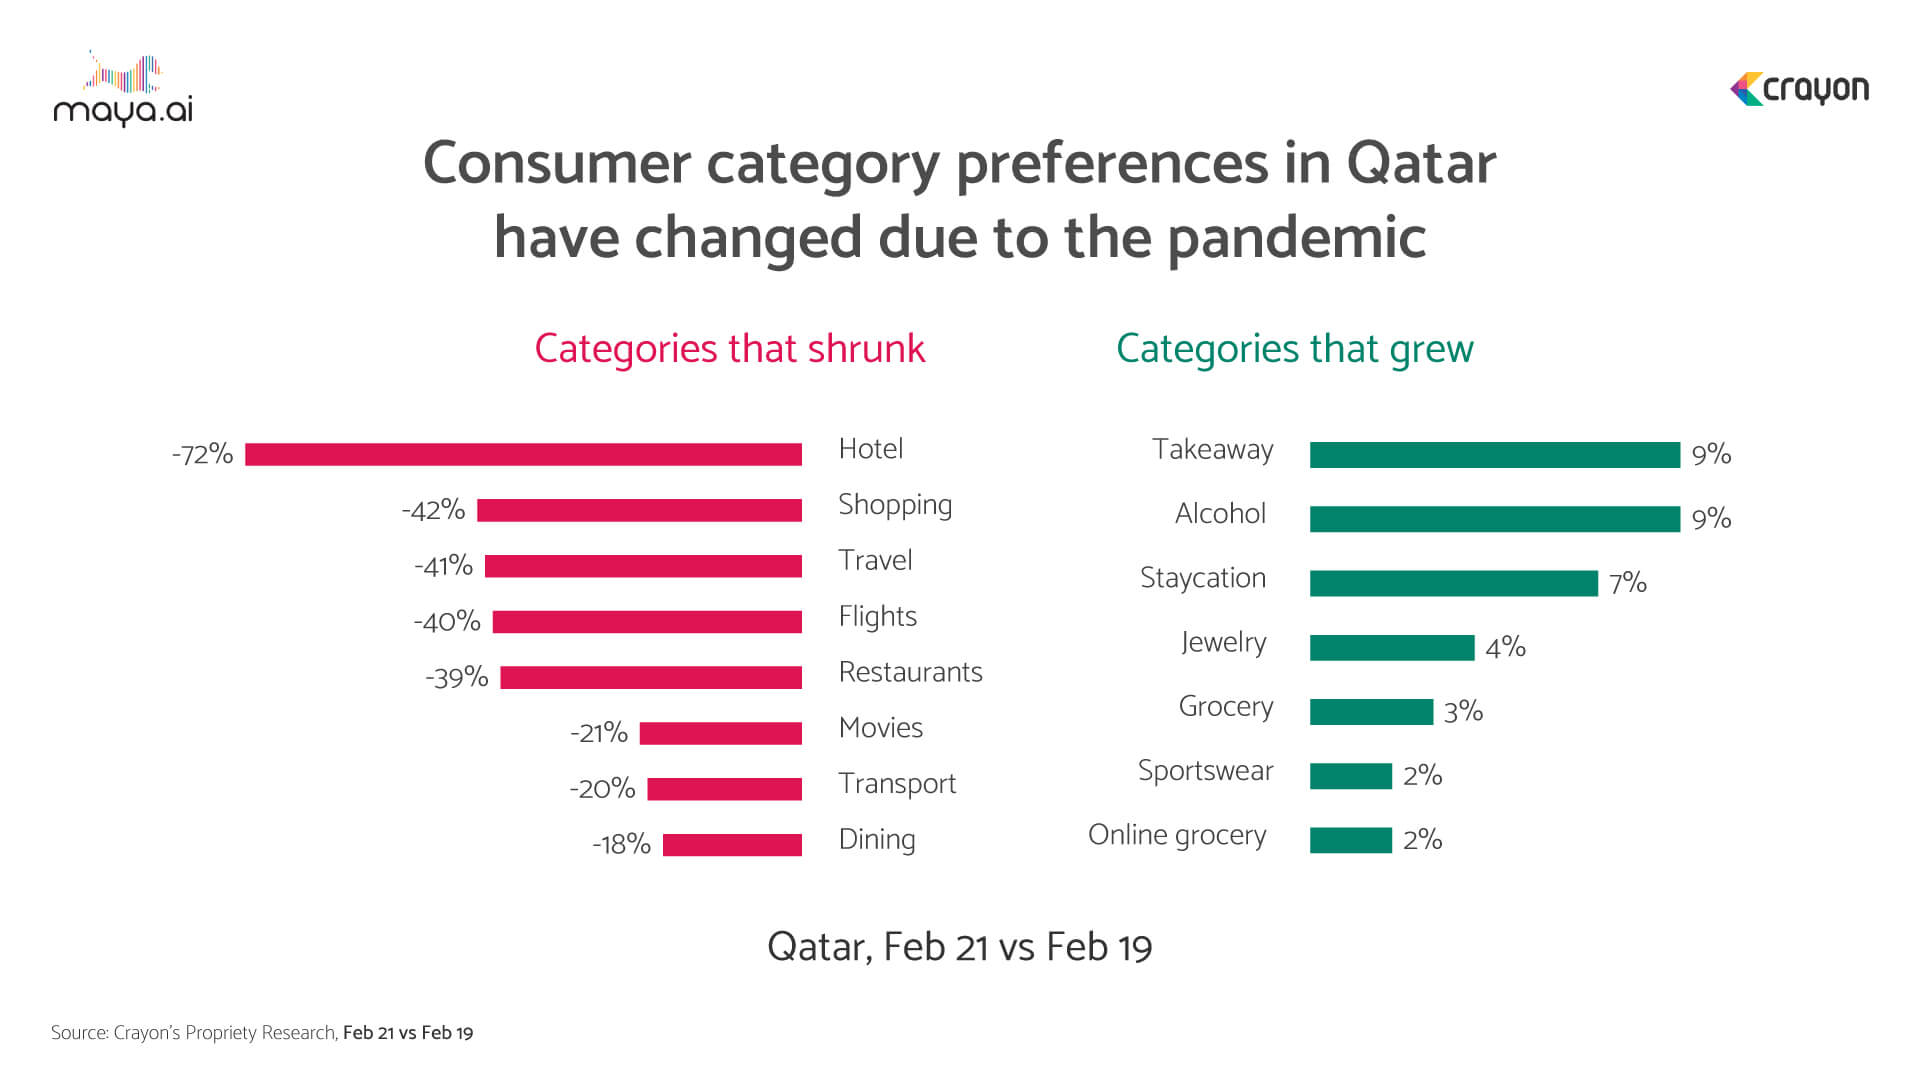 customer category preferences shifted